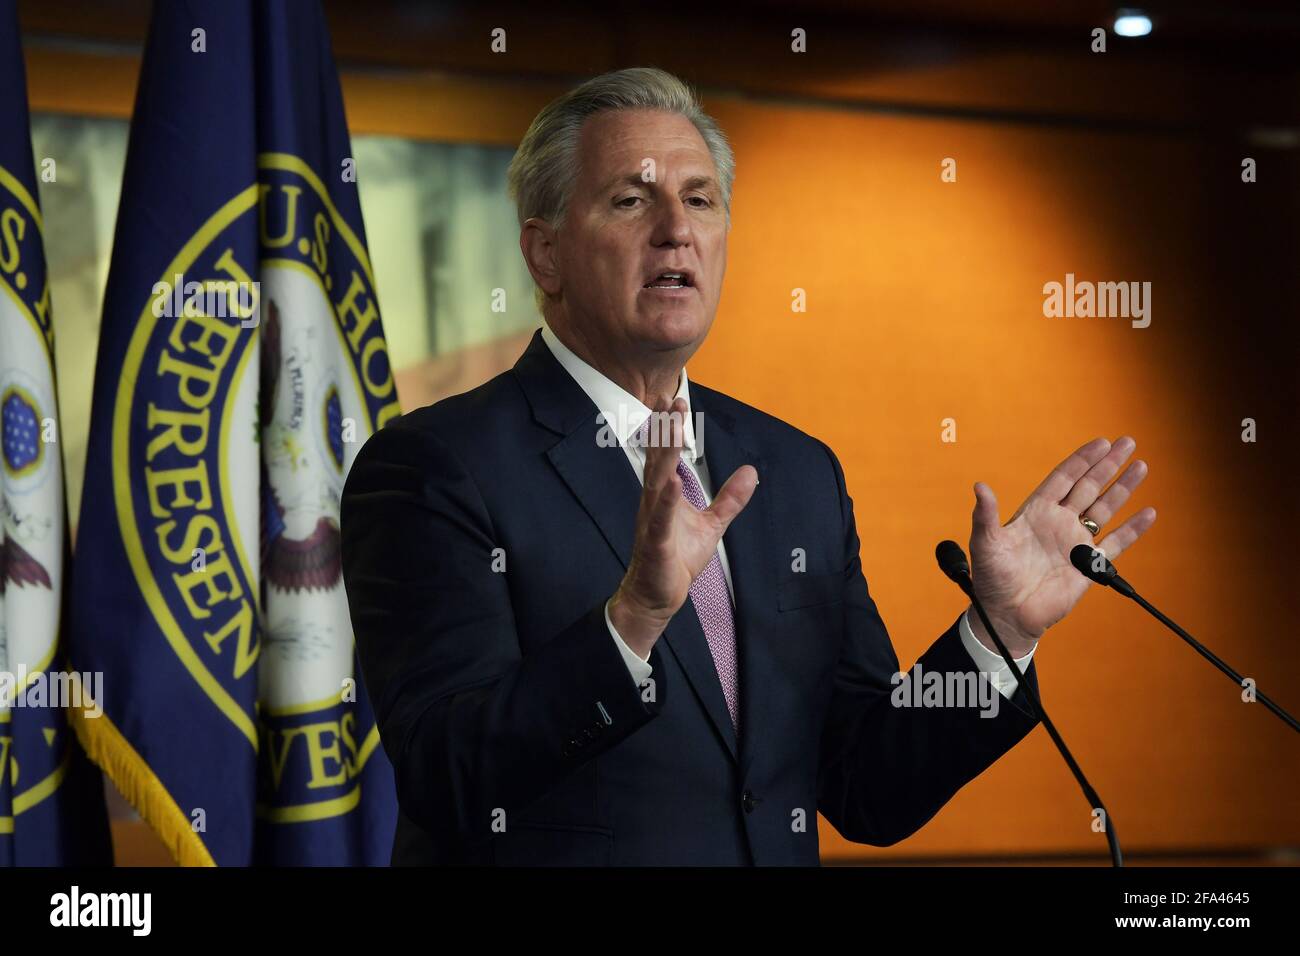 Washington, Distric of Columbia, USA. 22nd Apr, 2021. House Minority Leader KEVIN MCCARTHY(R-CA) speaks during his weekly press conference, today on February 25, 2021 at House Triangle in Washington DC, USA. Credit: Lenin Nolly/ZUMA Wire/Alamy Live News Stock Photo